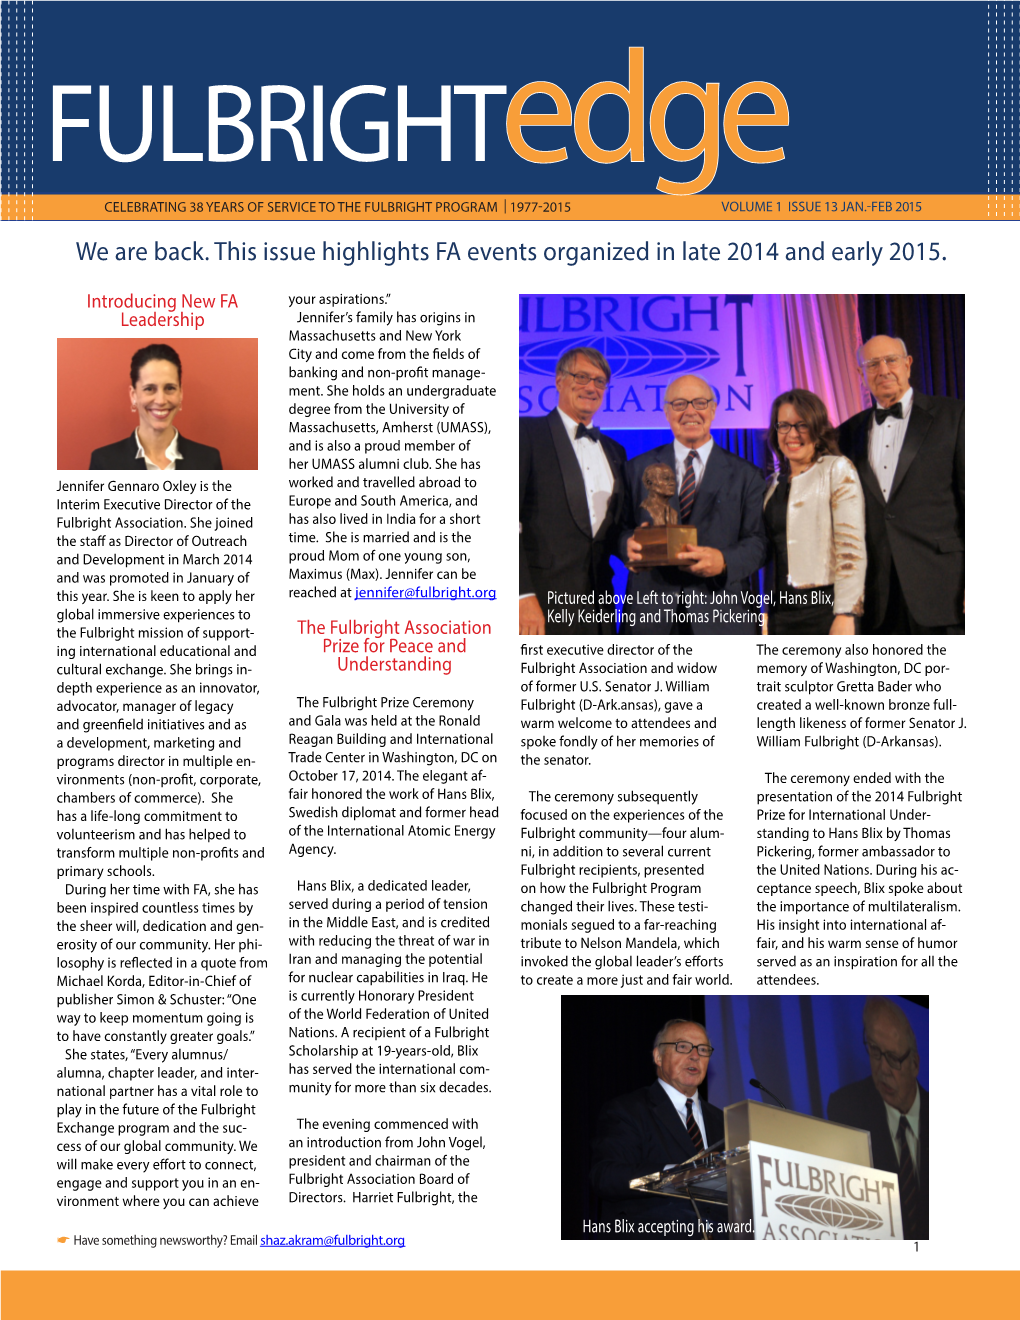 Fulbrightedge CELEBRATING 38 YEARS of SERVICE to the FULBRIGHT PROGRAM | 1977-2015 VOLUME 1 ISSUE 13 JAN.-FEB 2015 We Are Back